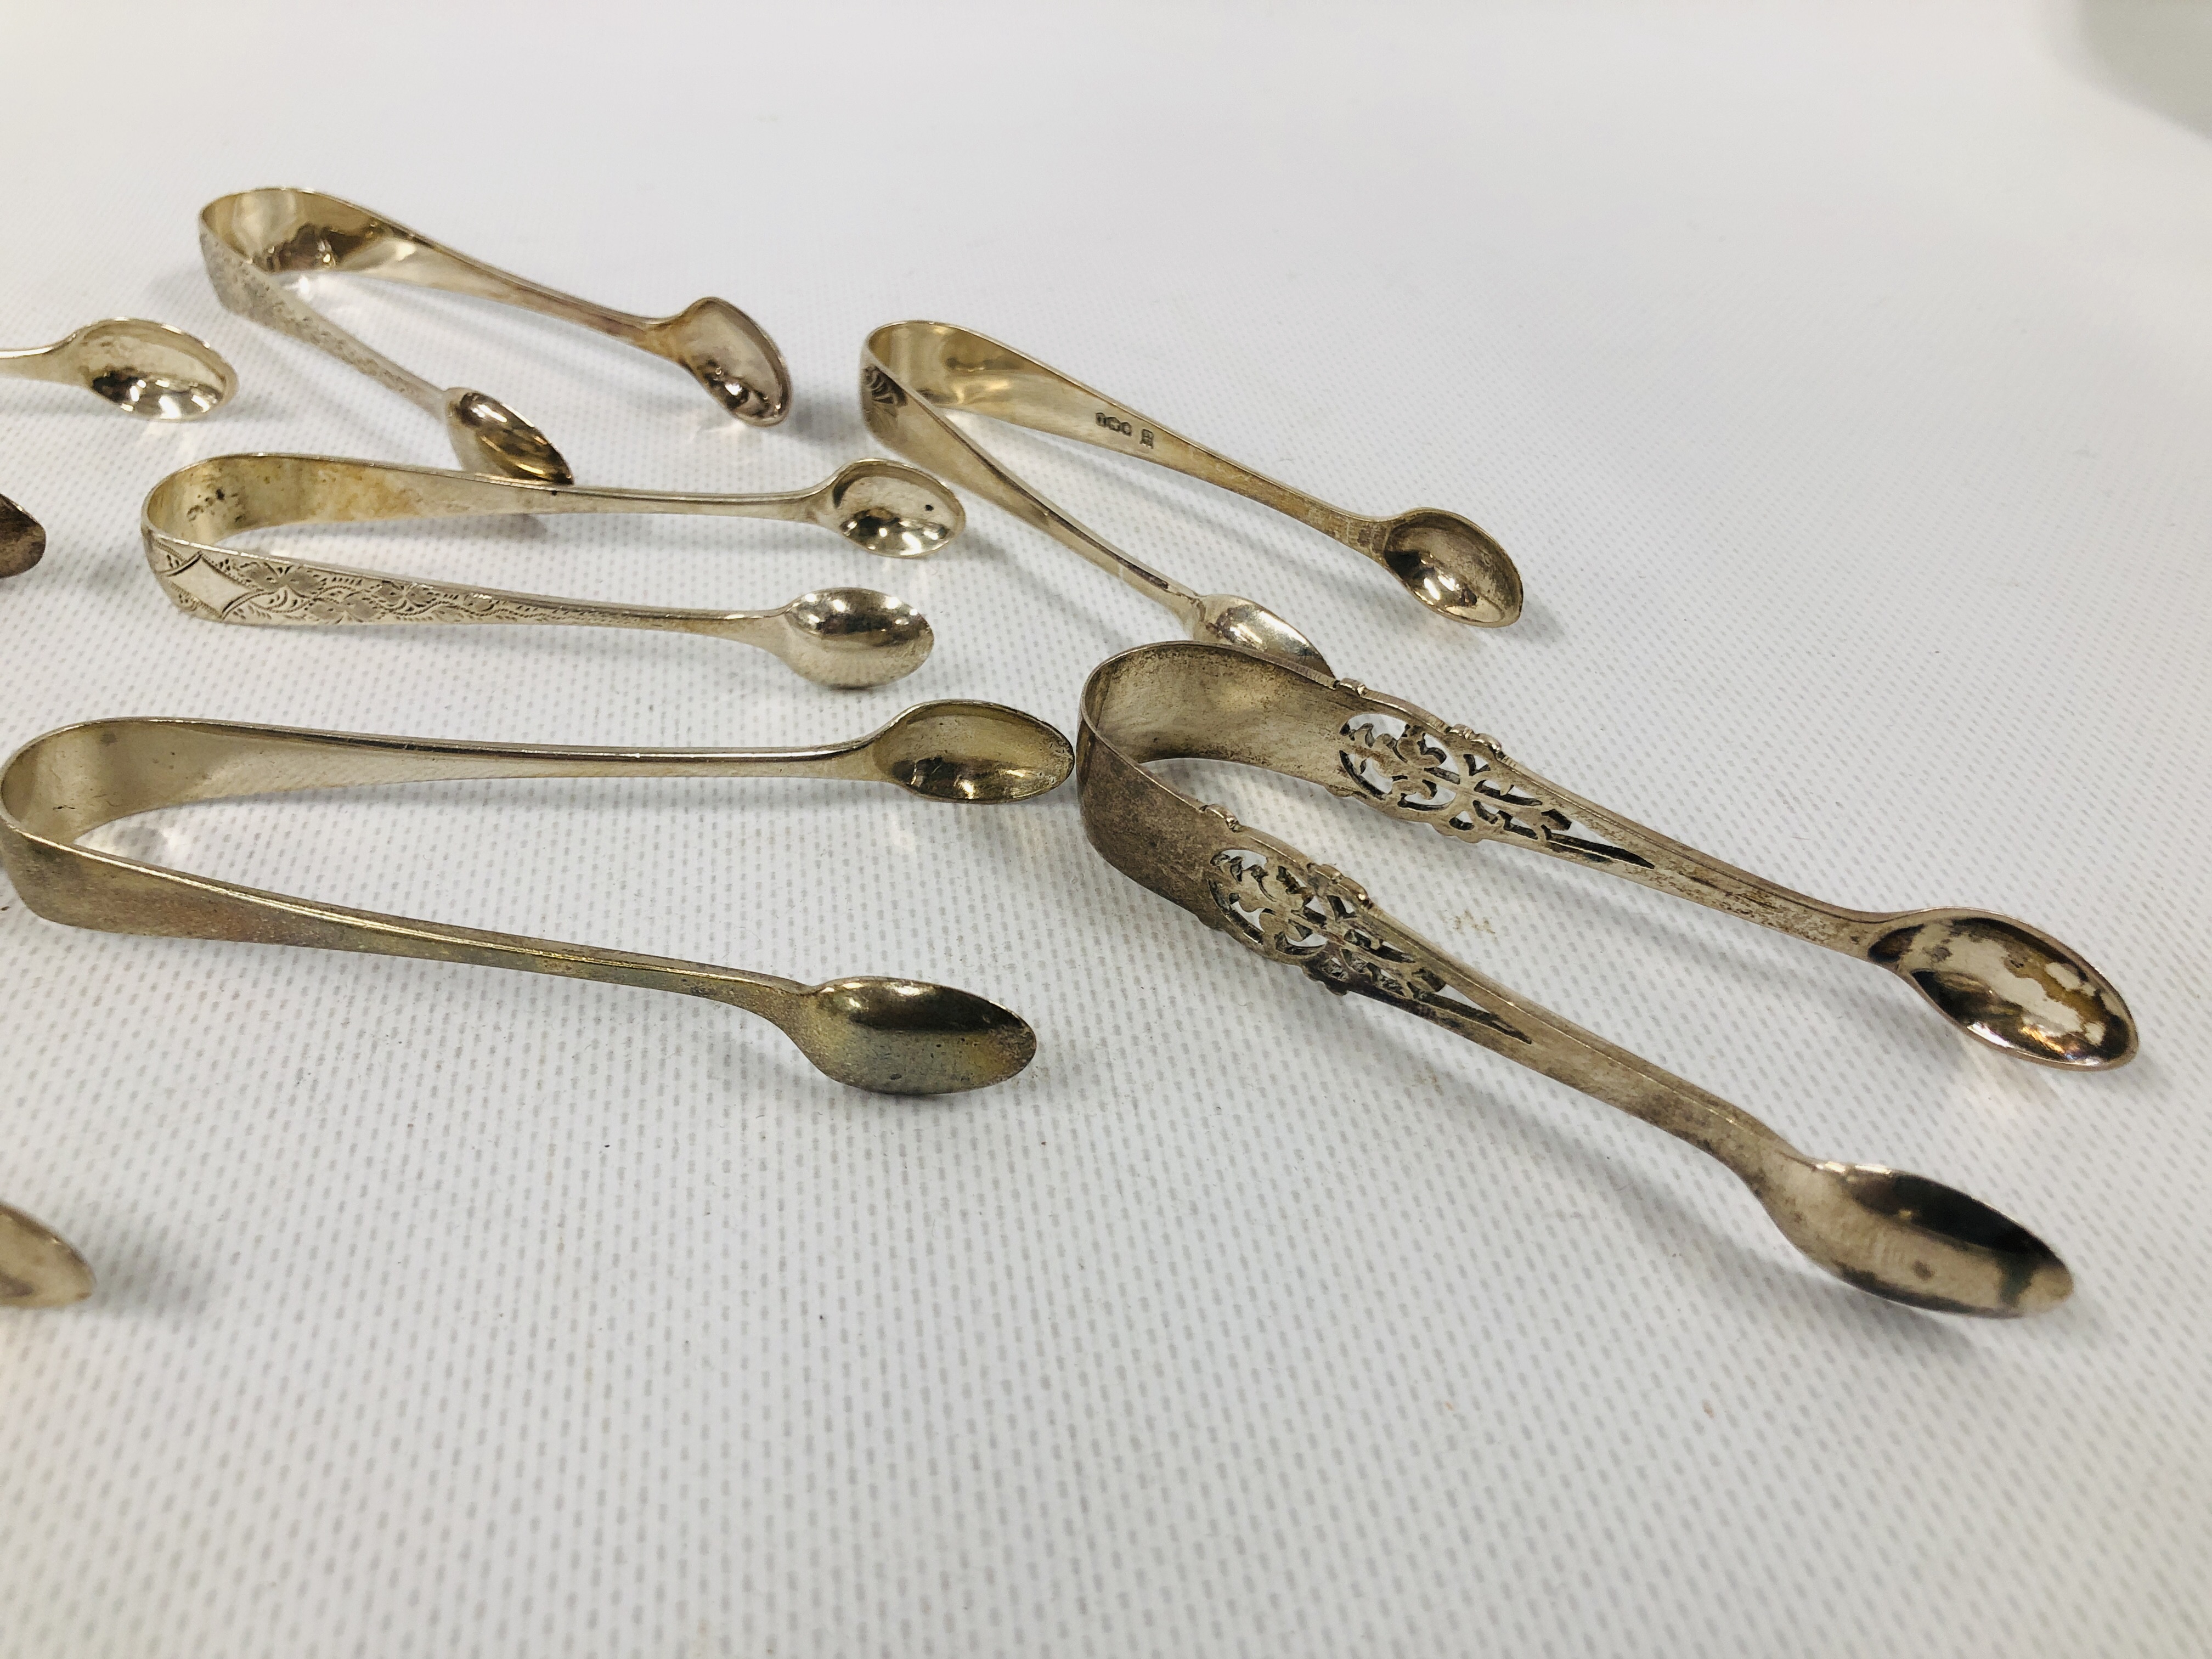 GROUP OF 8 VARIOUS SILVER SUGAR NIPS, VARIOUS MAKERS AND ASSAYS. - Image 6 of 7